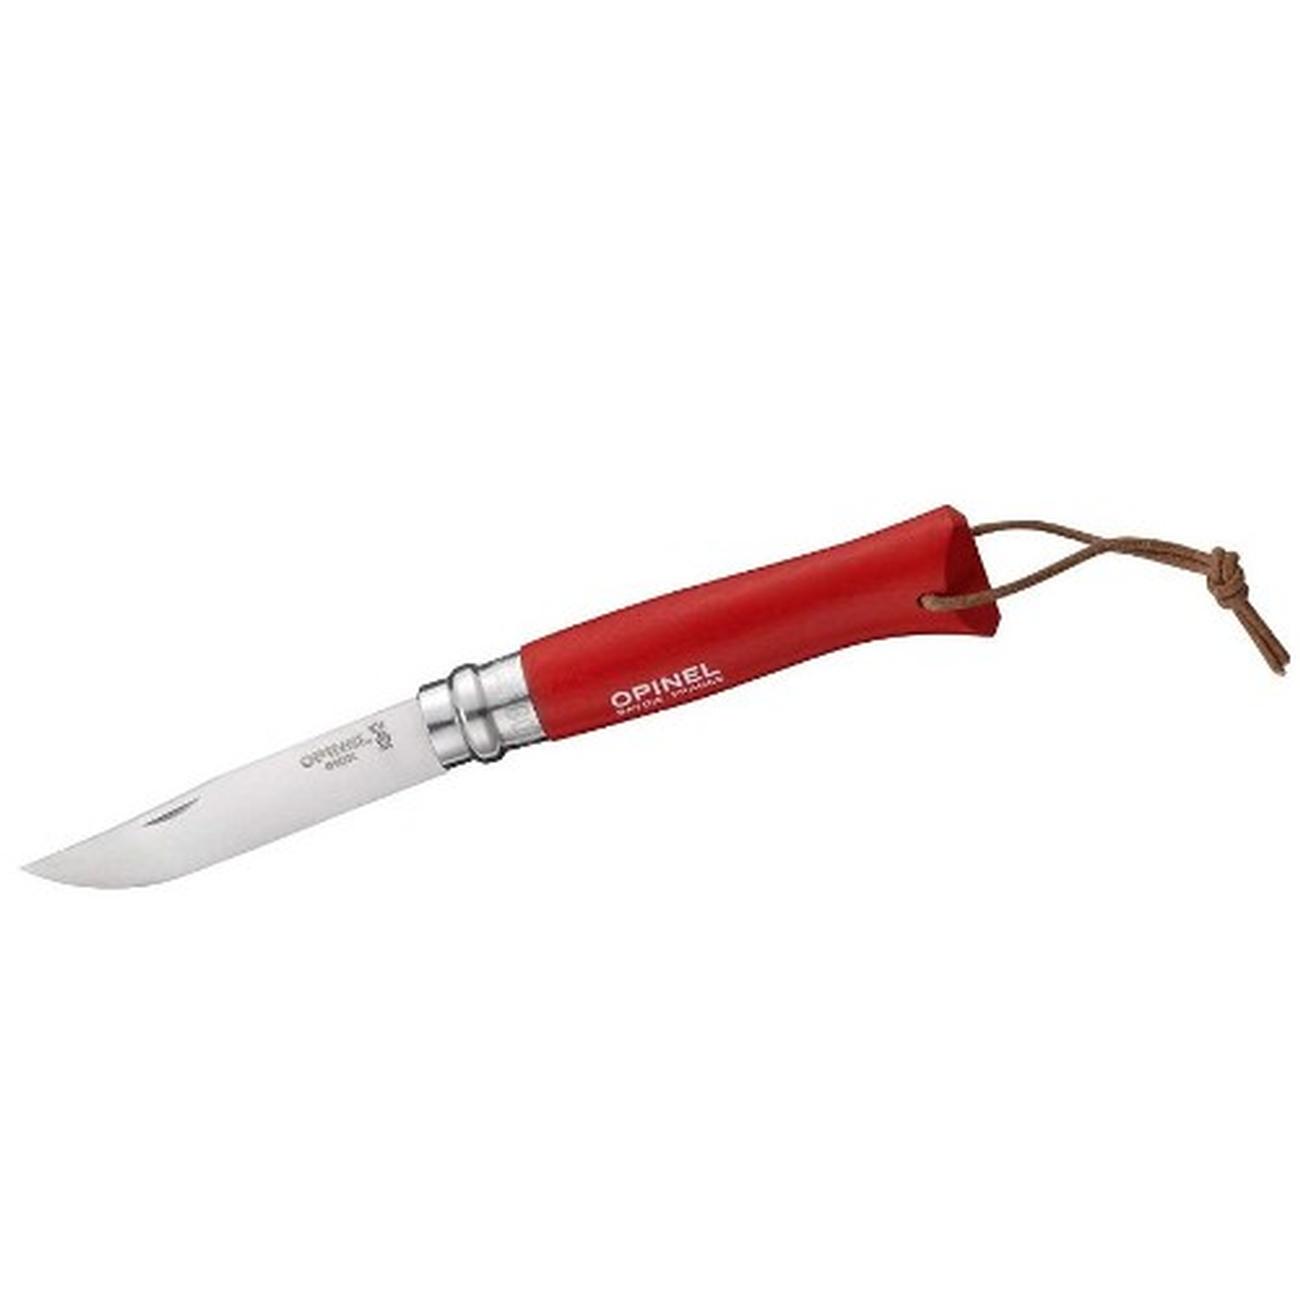 Opinel No. 8 Folding Knife Reviews - Trailspace